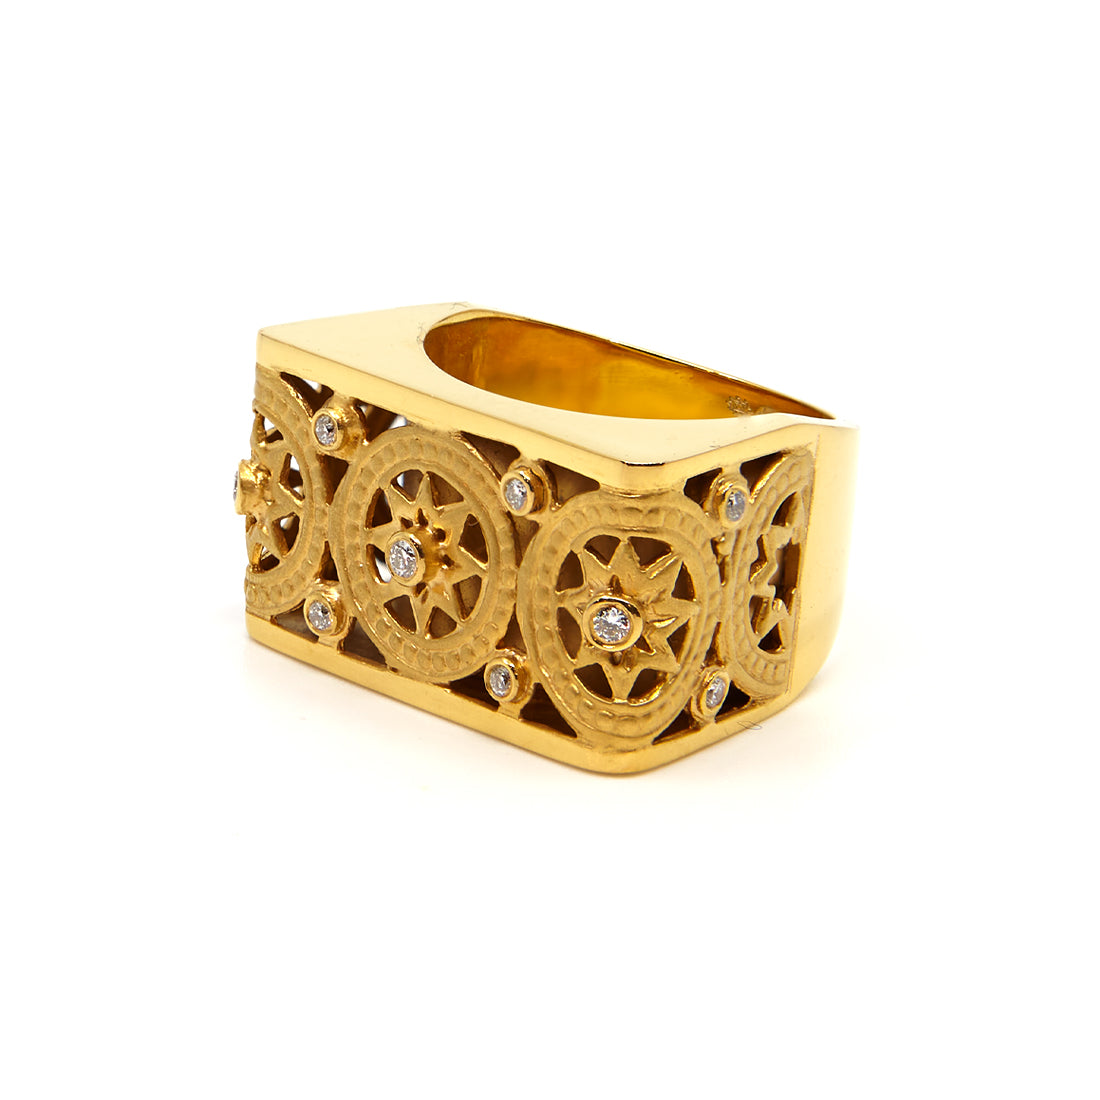 Yellow gold ring with diamond